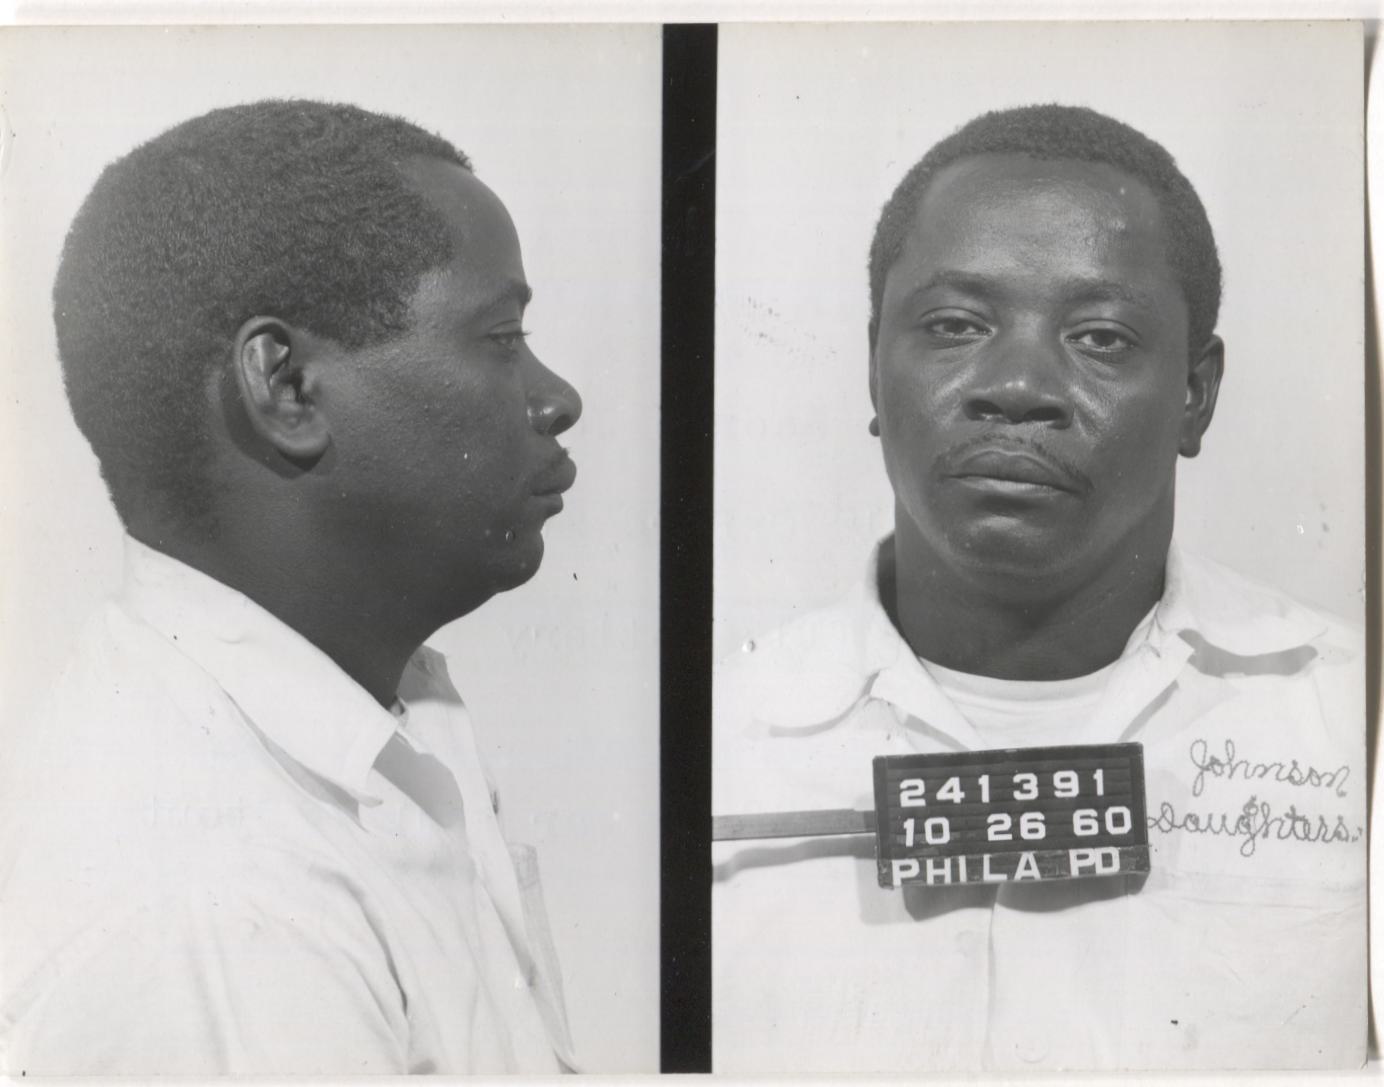 George Johnson Mugshot - Arrested on 10/26/1960 for Illegal Lottery